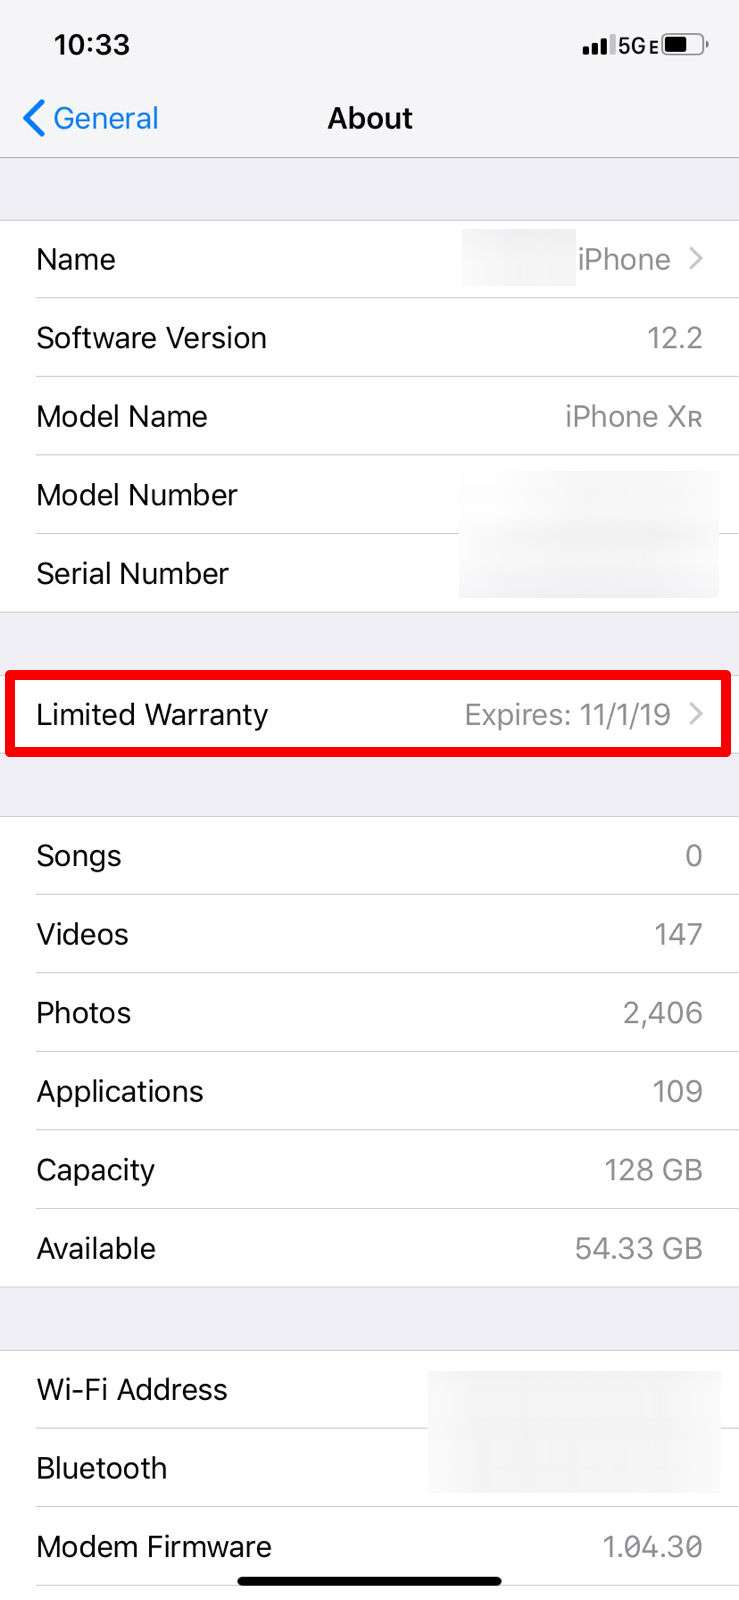 How to check your iPhone or iPad's warranty and AppleCare expiration in Settings